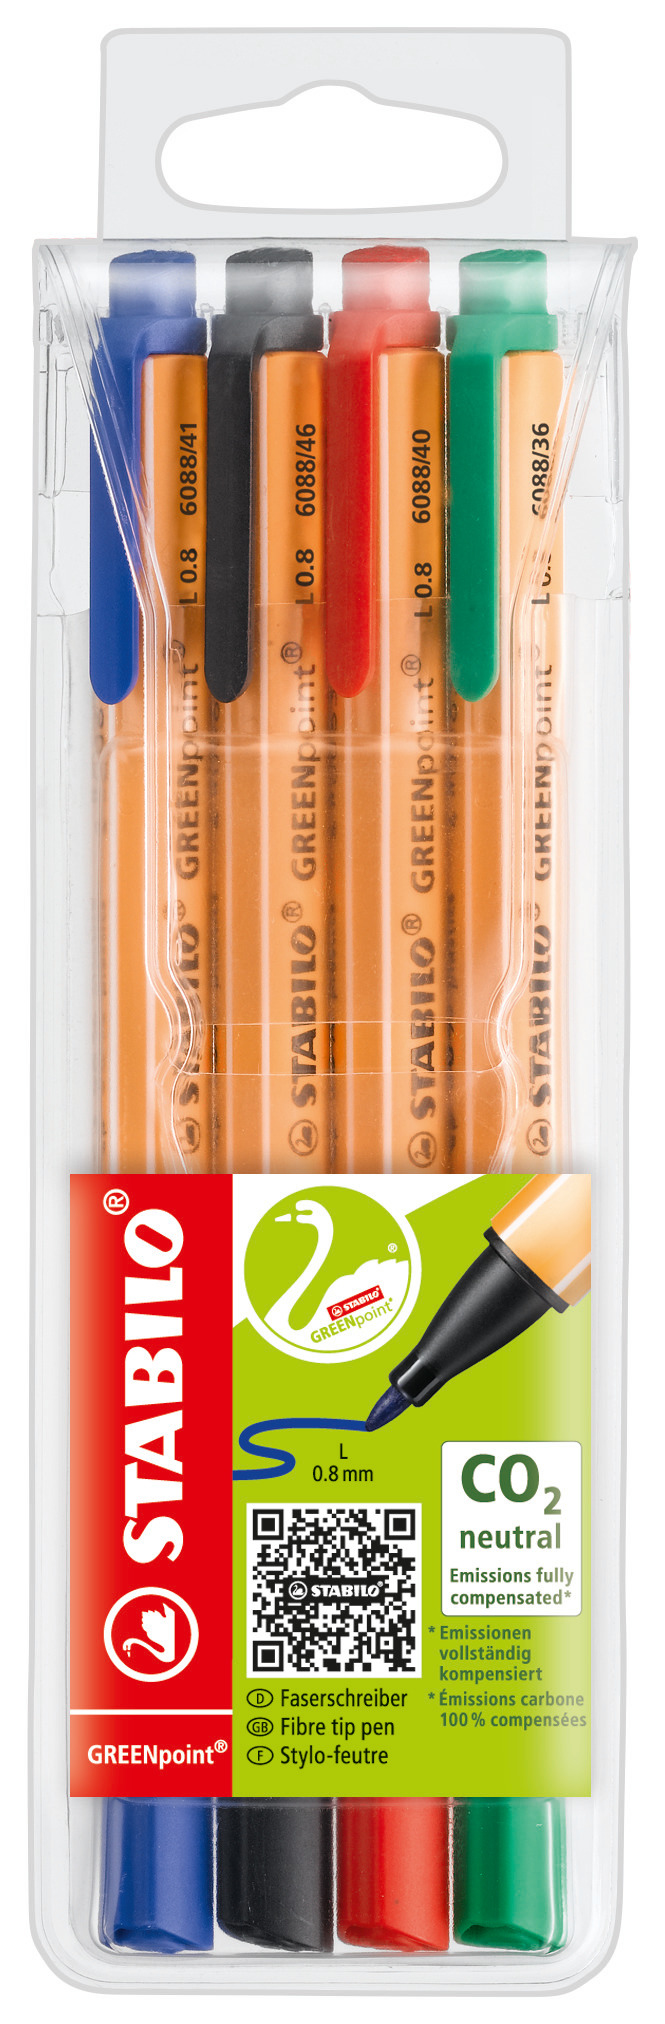 stabilo Stabilo Greenpoint Co2 Neutral Fibre Tip Sign Pen 0.8mm Line Black/blue/red/green (wallet 4) 6088/4 6088/4 - AD01